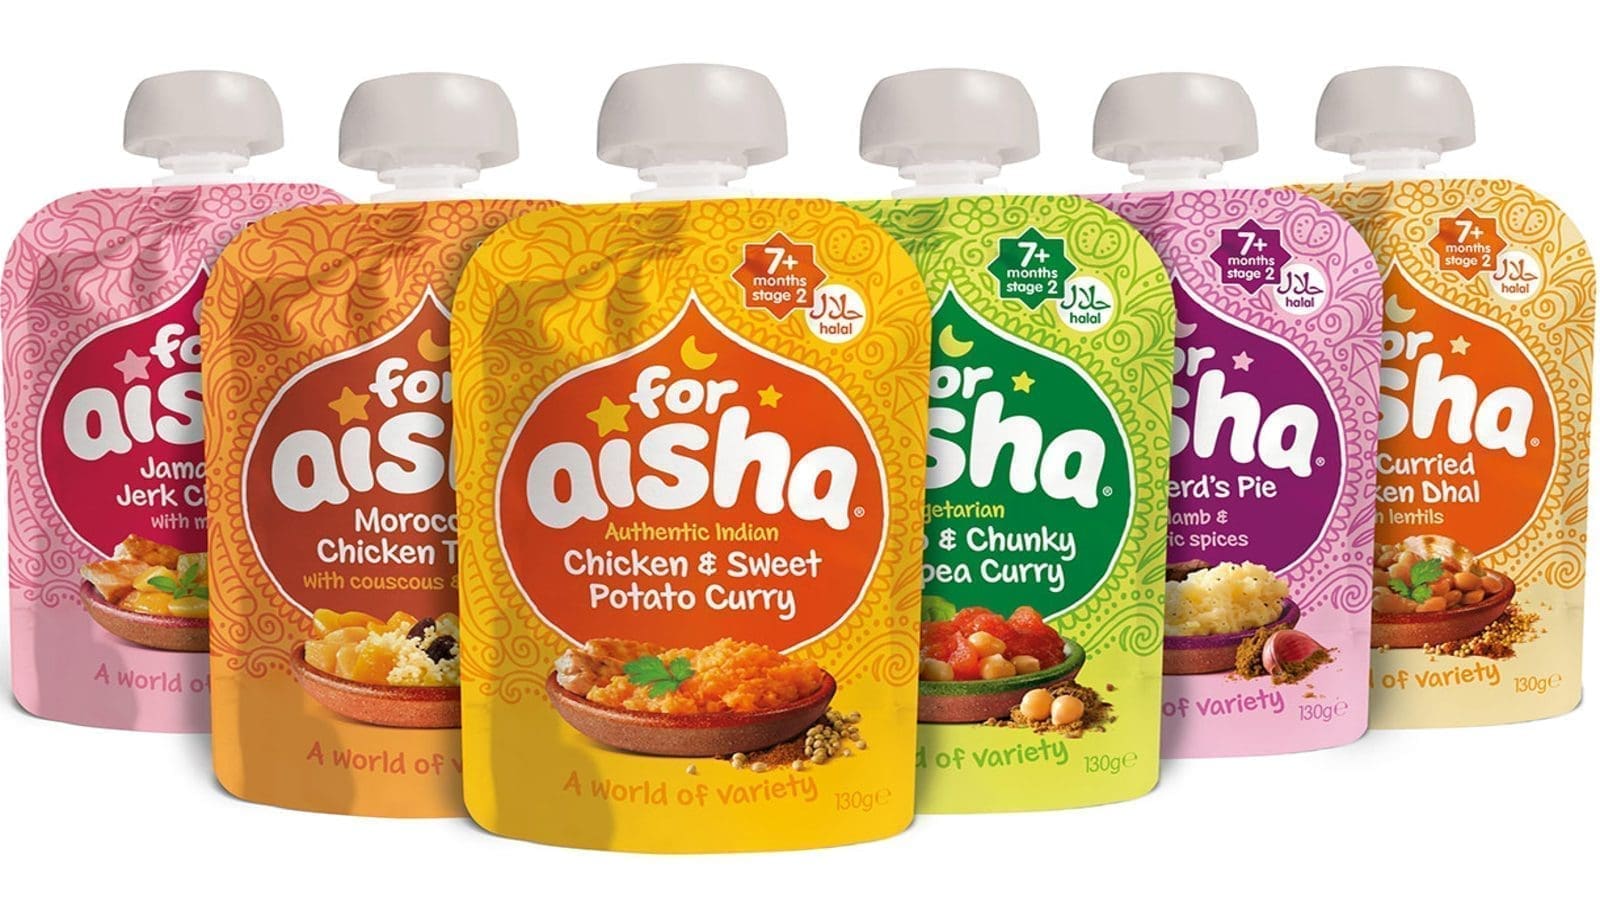 For Aisha Baby Foods makes new executive appointments to help grow the brand internationally